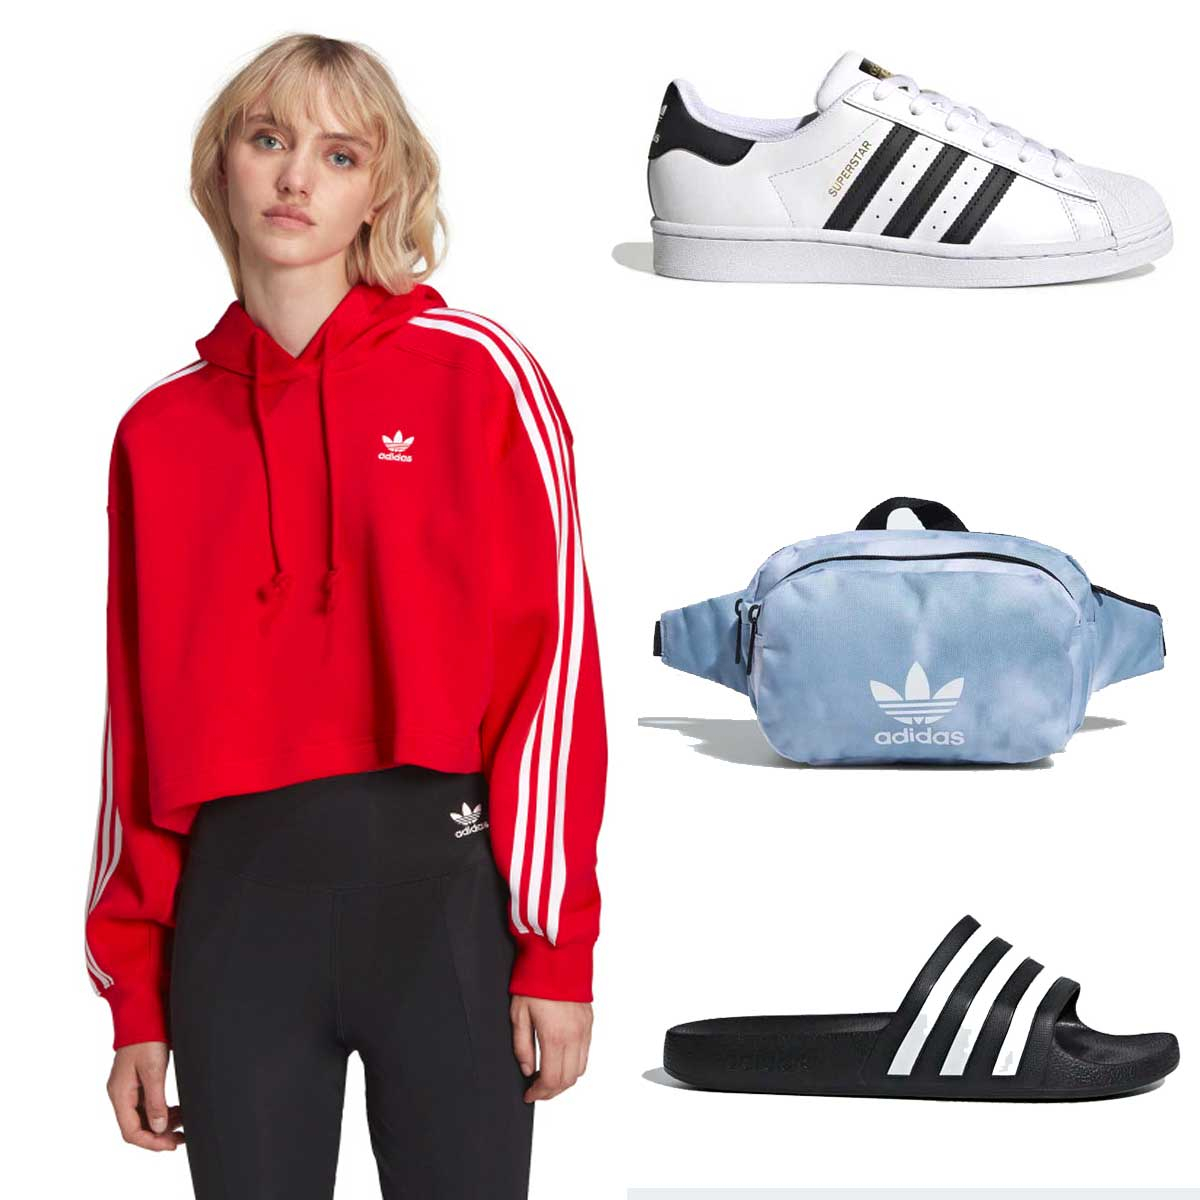 ik heb dorst grootmoeder tieners Adidas End of Season Deals: Up to 60% Off Clothes, Shoes & More - E! Online